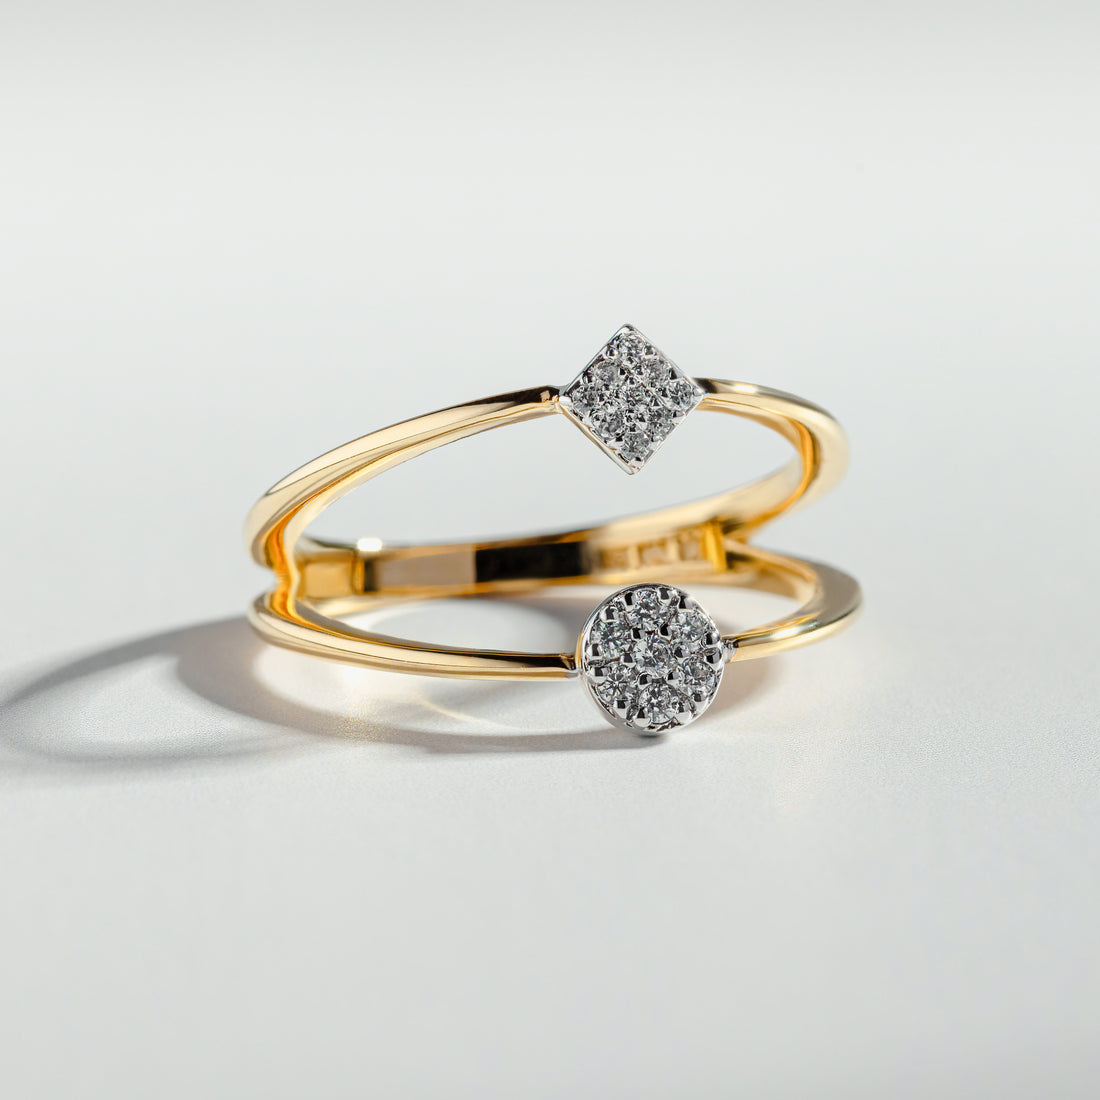 Oui, madame | Atelier RMR Montreal | Rings